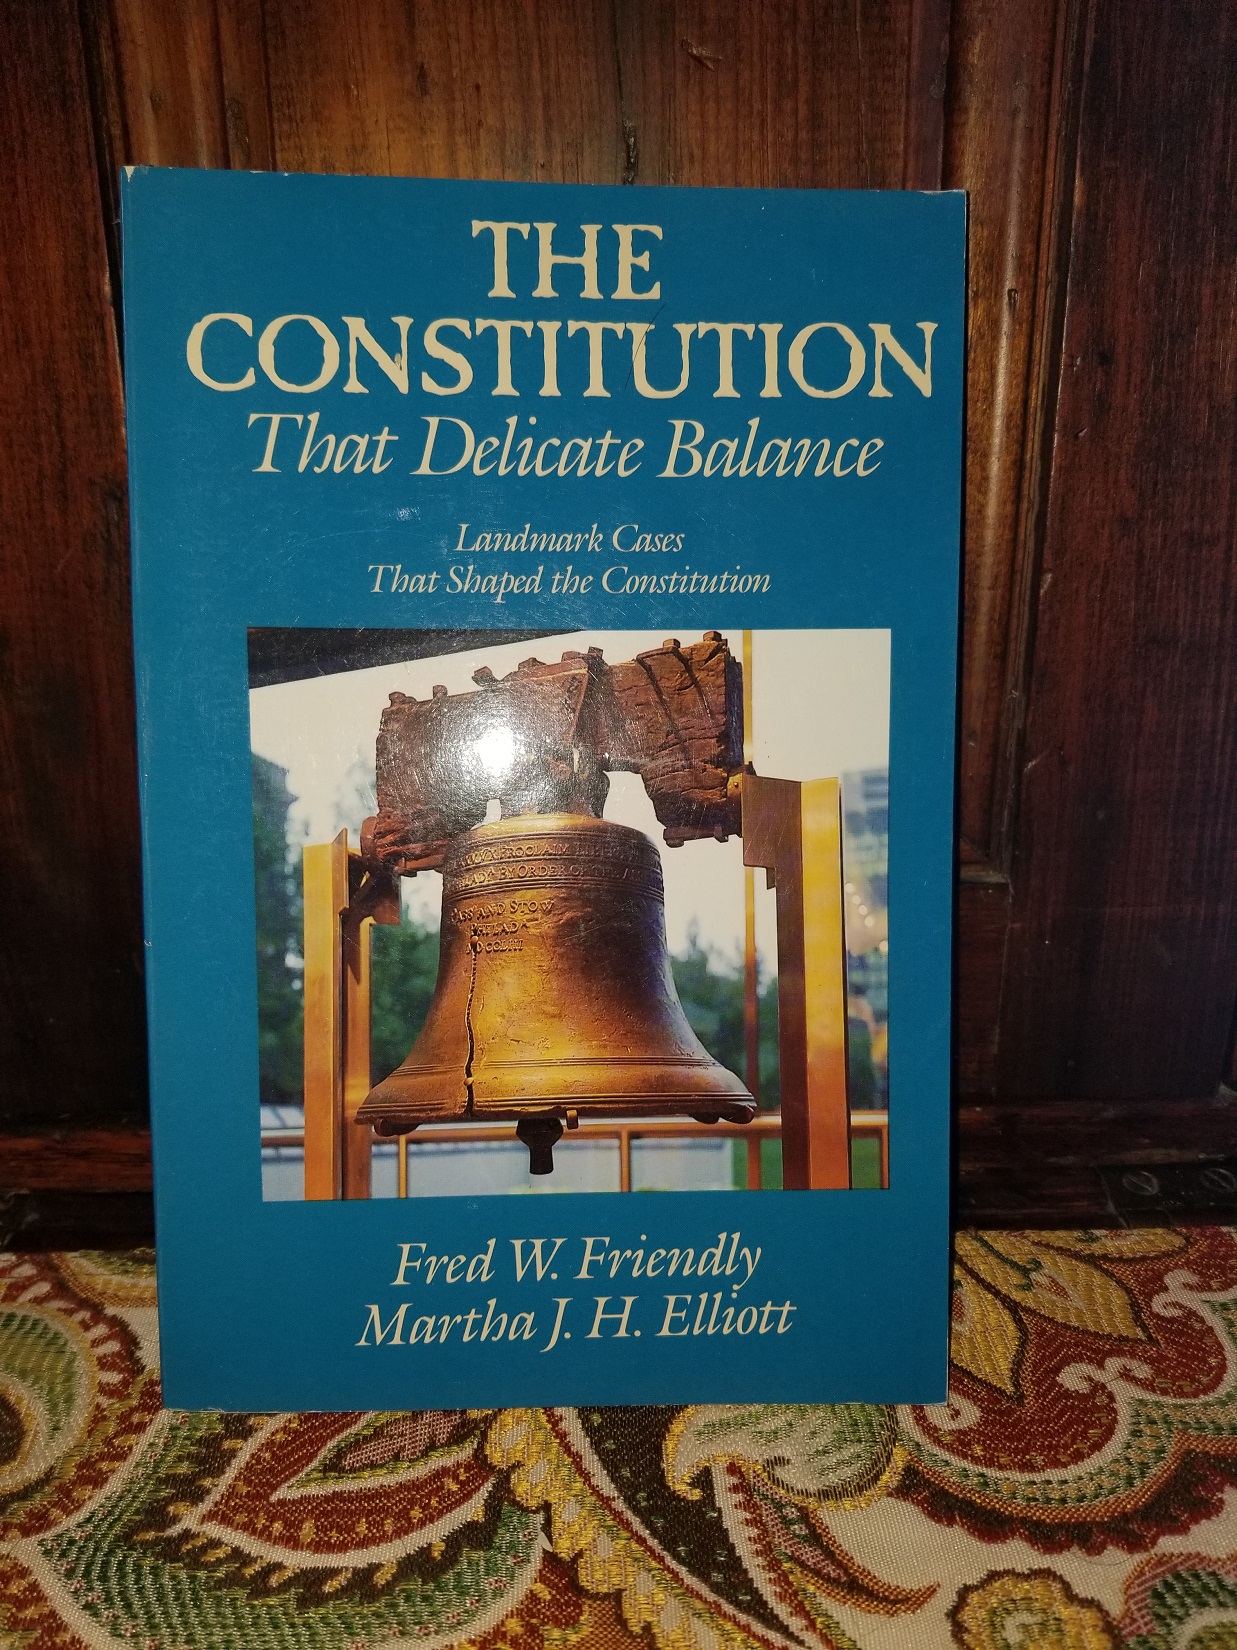 The Constitution: That Delicate Balance 1984 by
                Fred W. Friendly, Martha J.H. Elliott